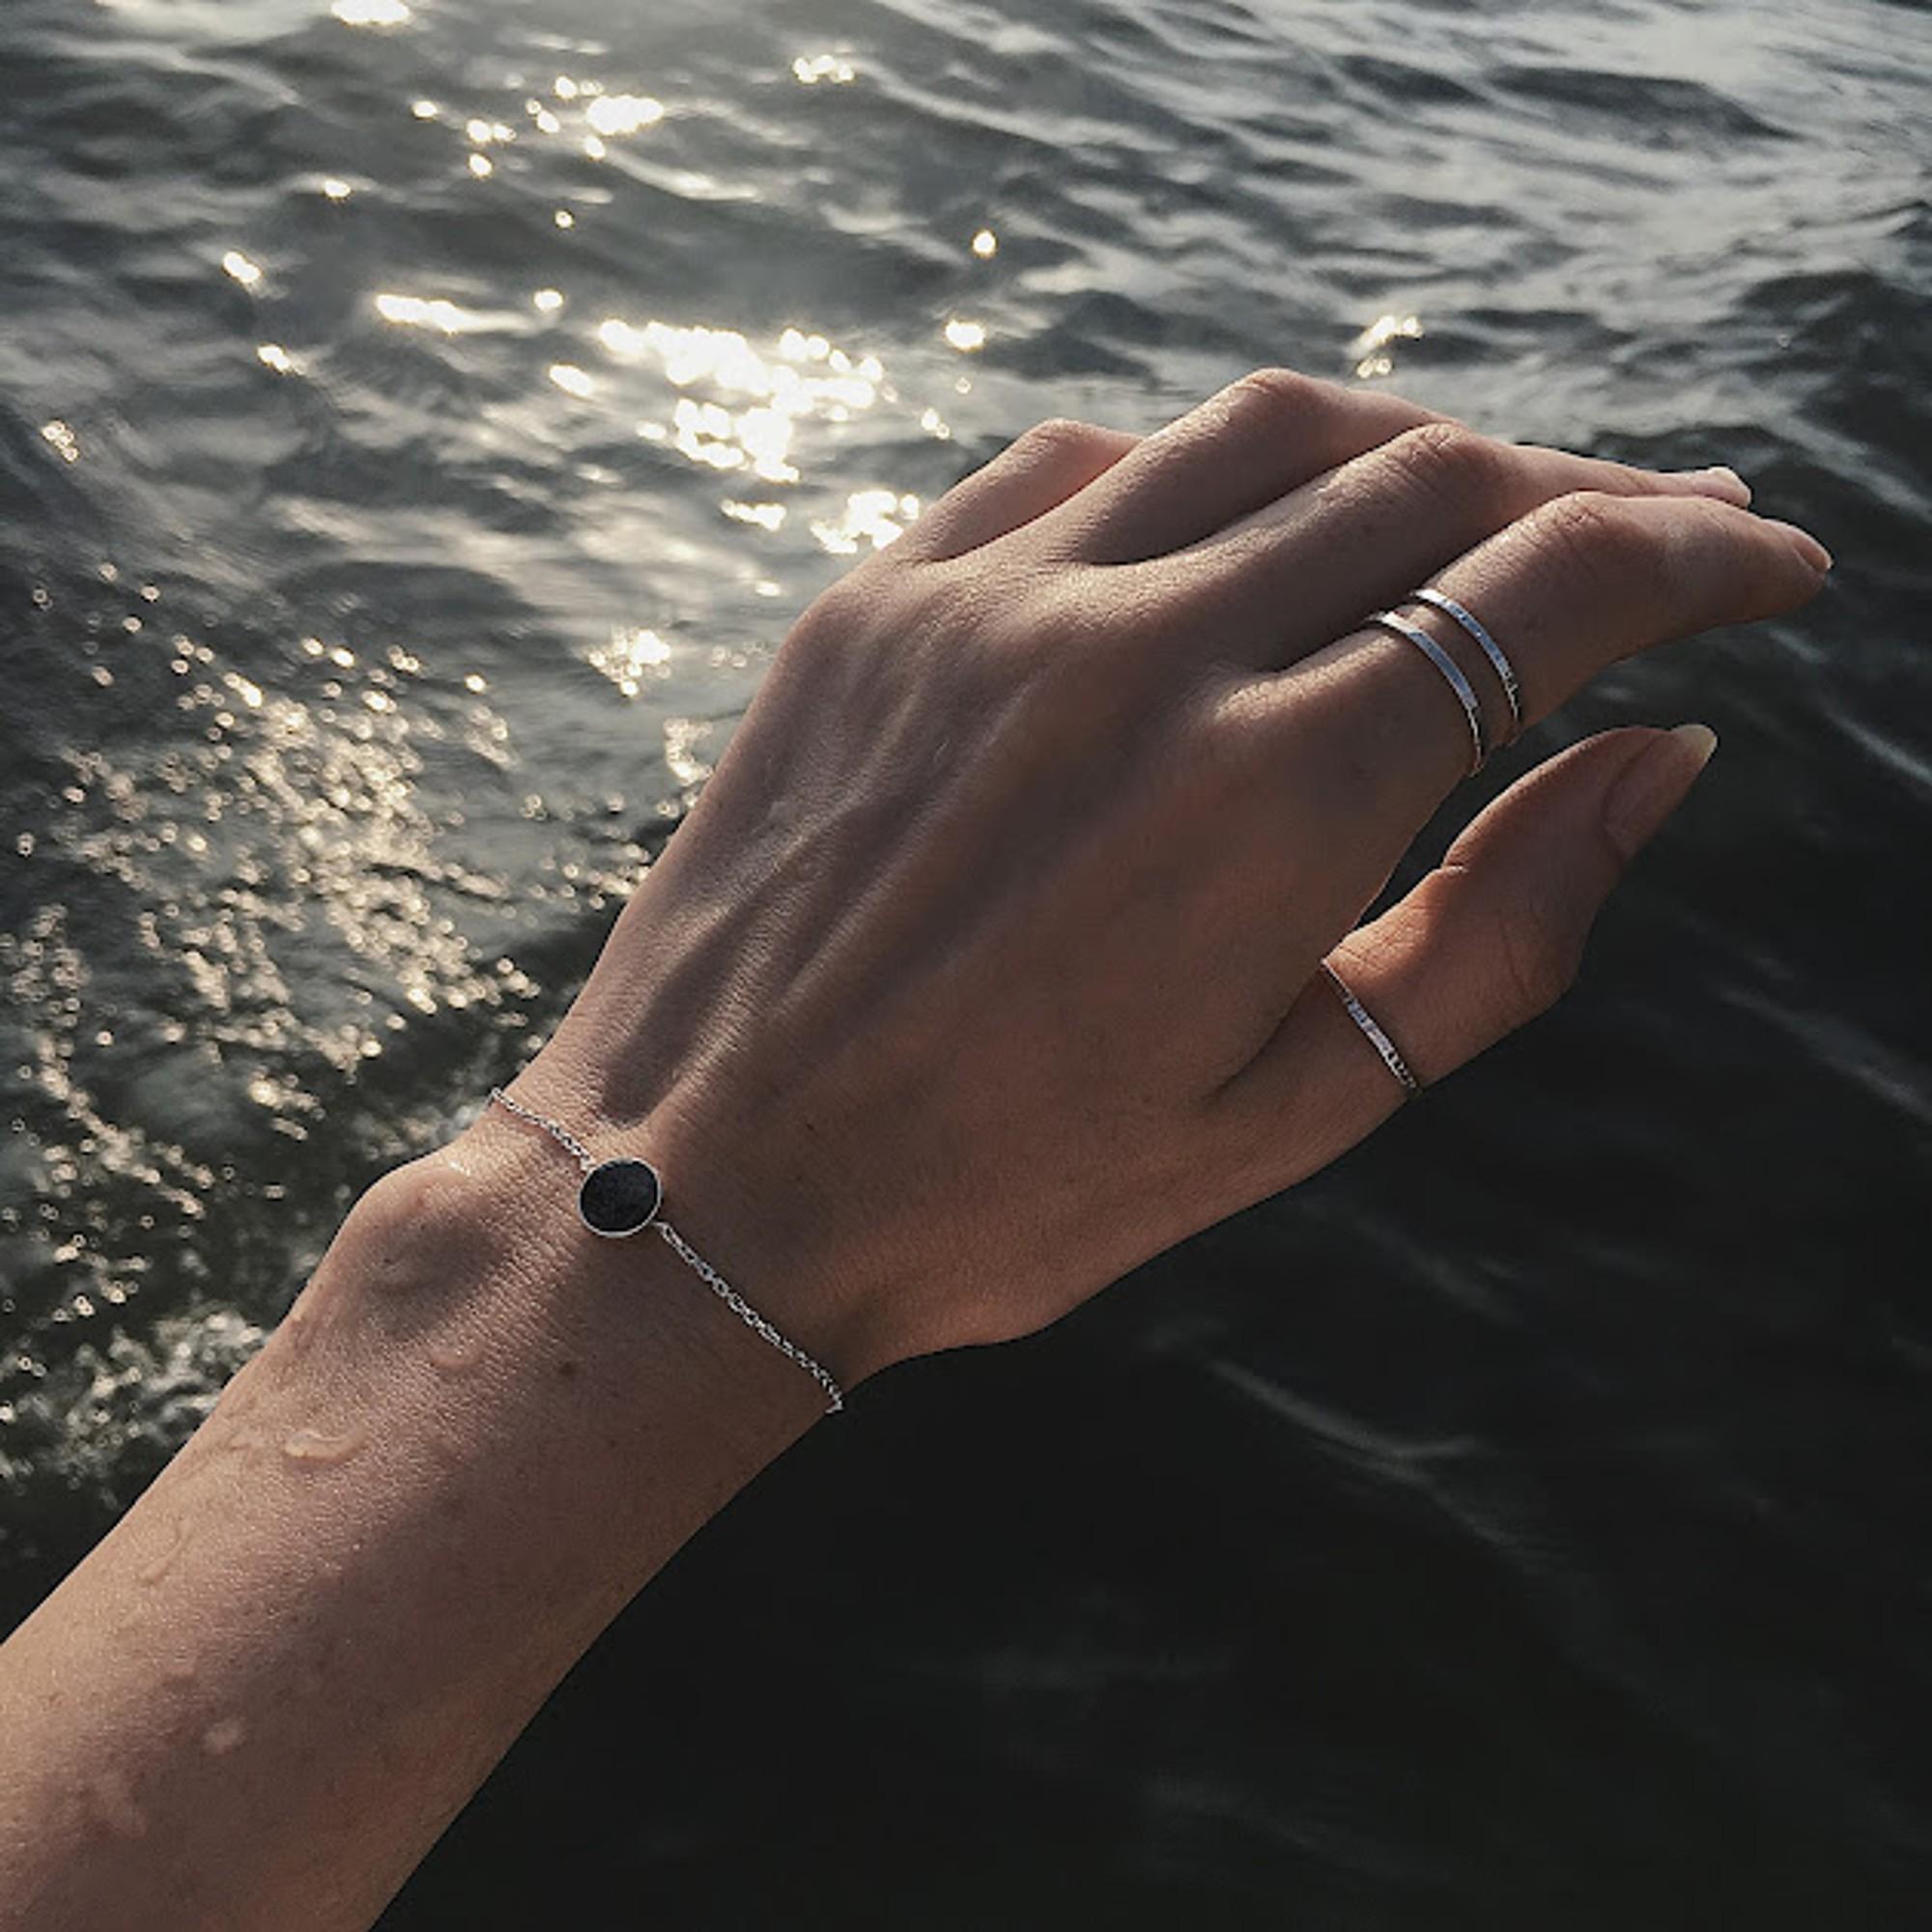 This bracelet with a grey stone on a delicate silver chain will be a beautiful adornment for your wrist. Its minimalist design means you can wear it with practically any outfit. It will be perfect for both elegant outings and meetings with